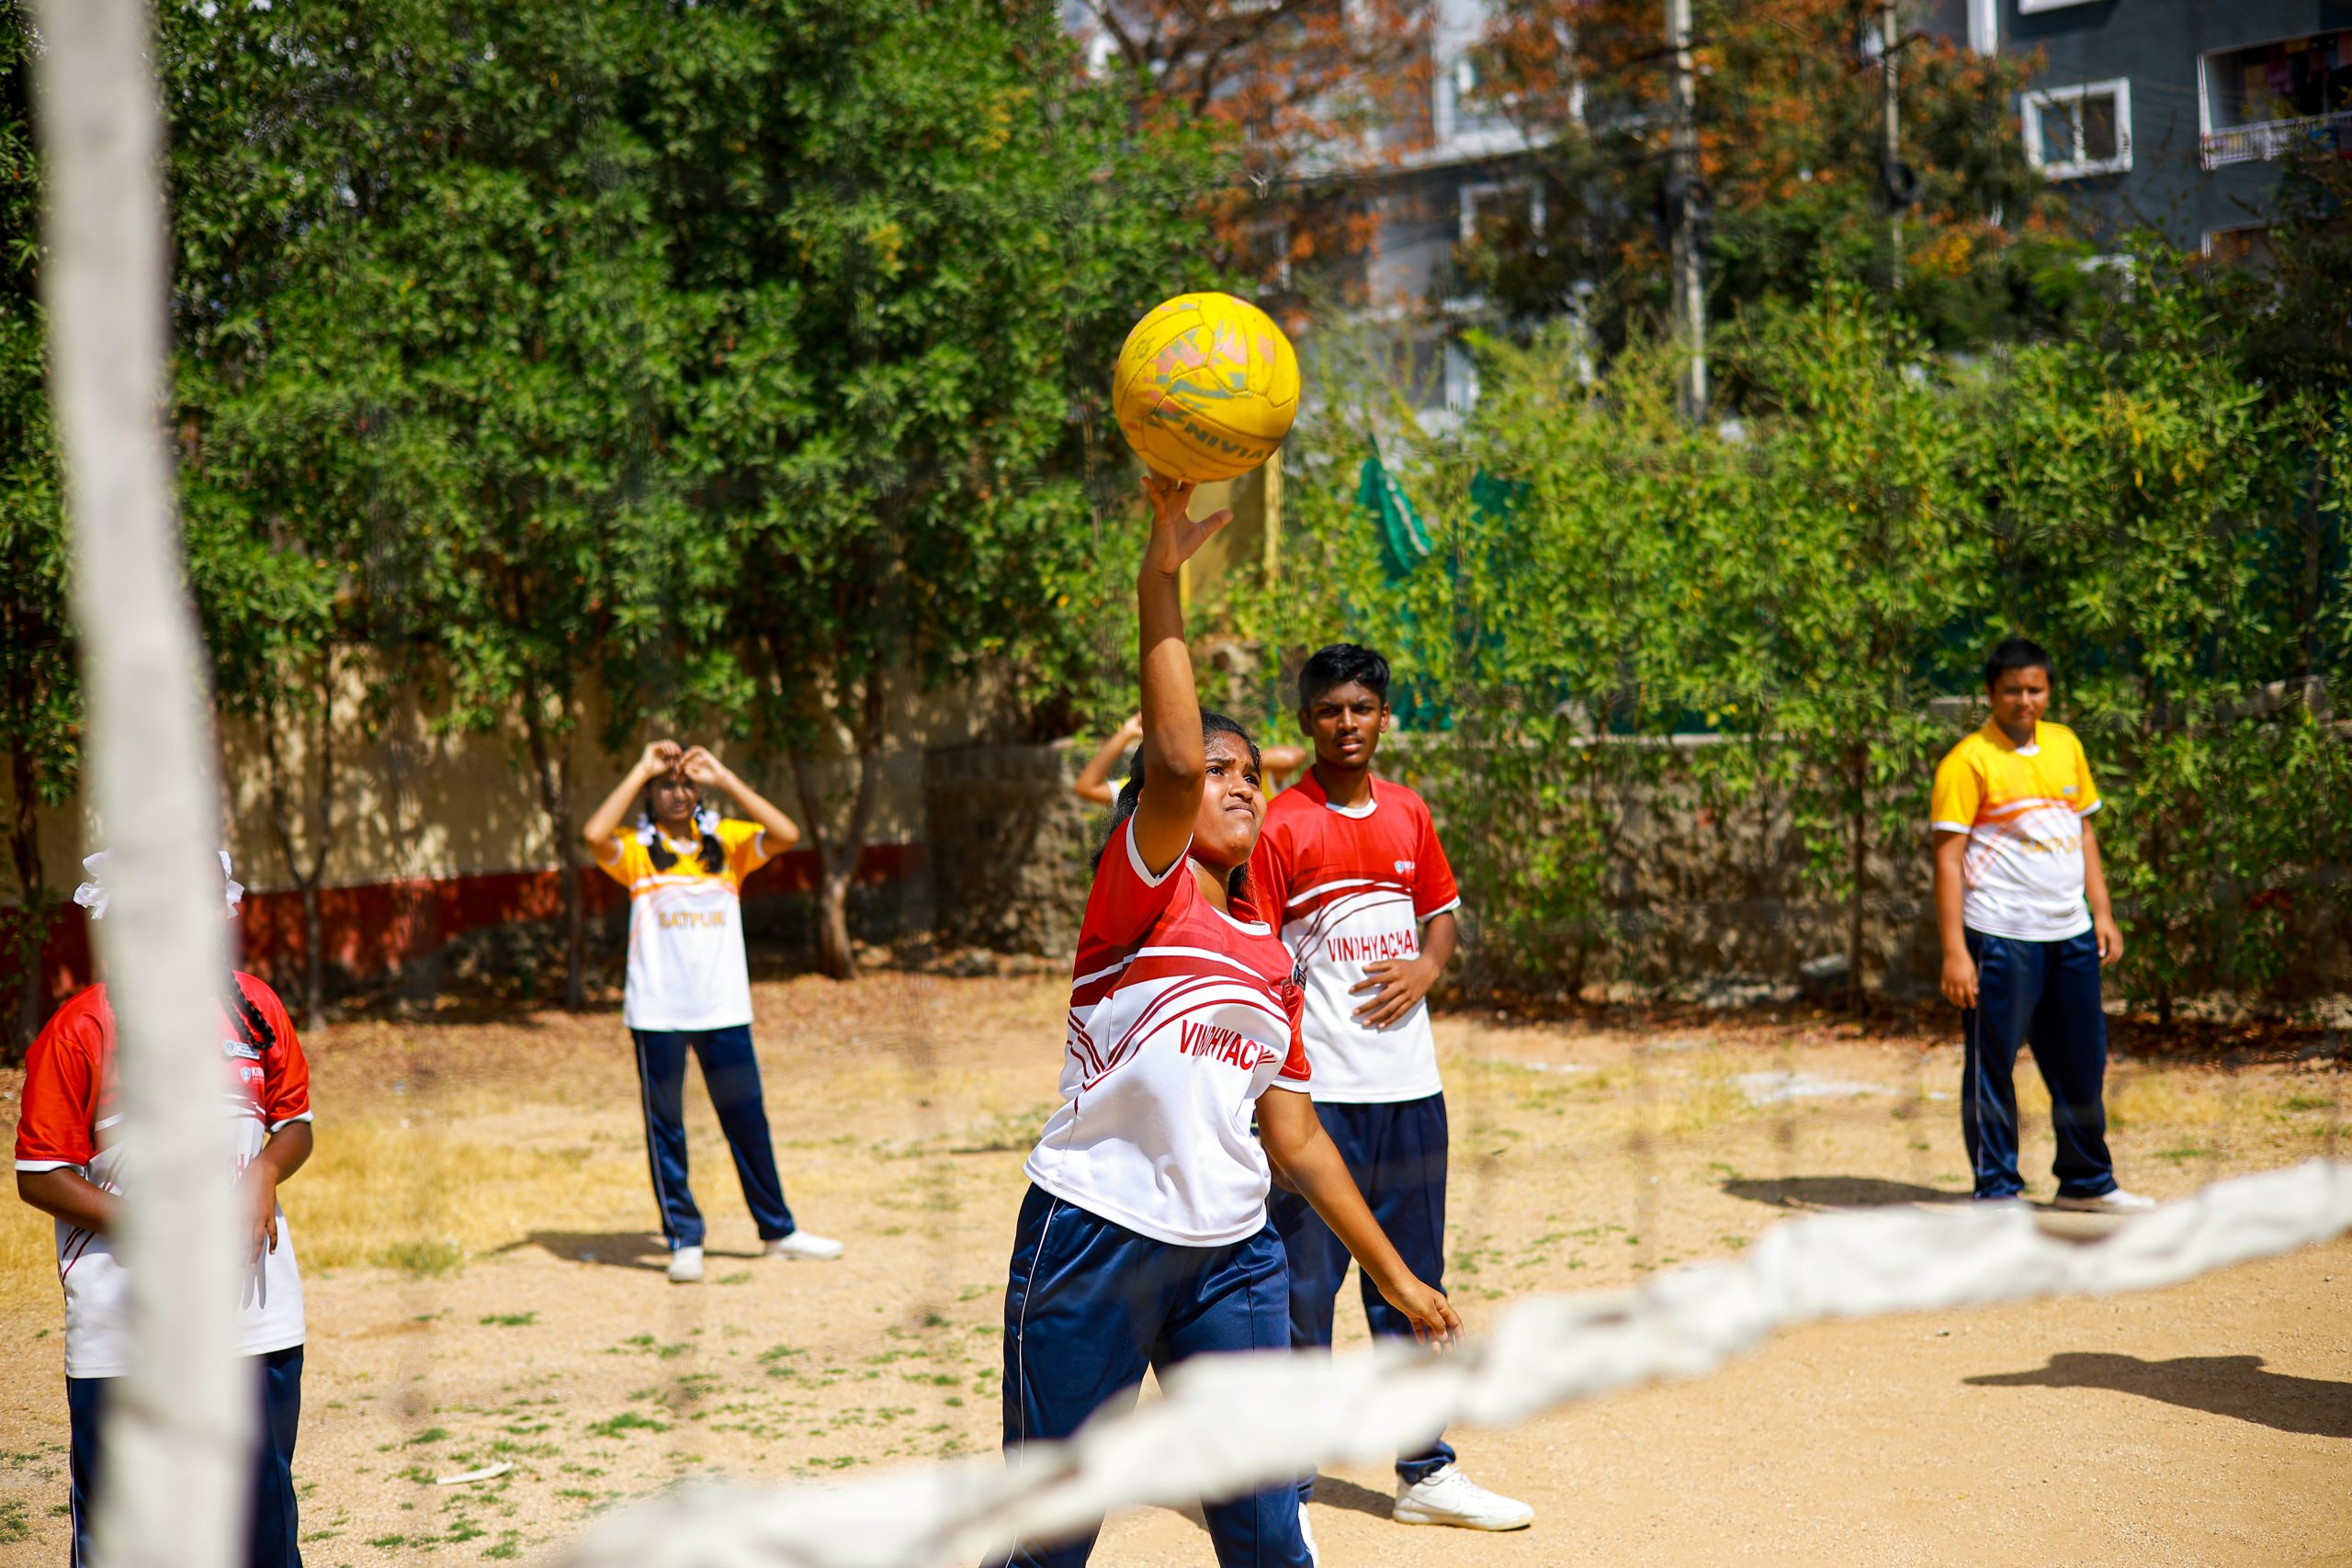 Enthusiastic students participating in a spirited game of throwball at Kiran International School, showcasing teamwork and sportsmanship in an energetic and competitive setting.